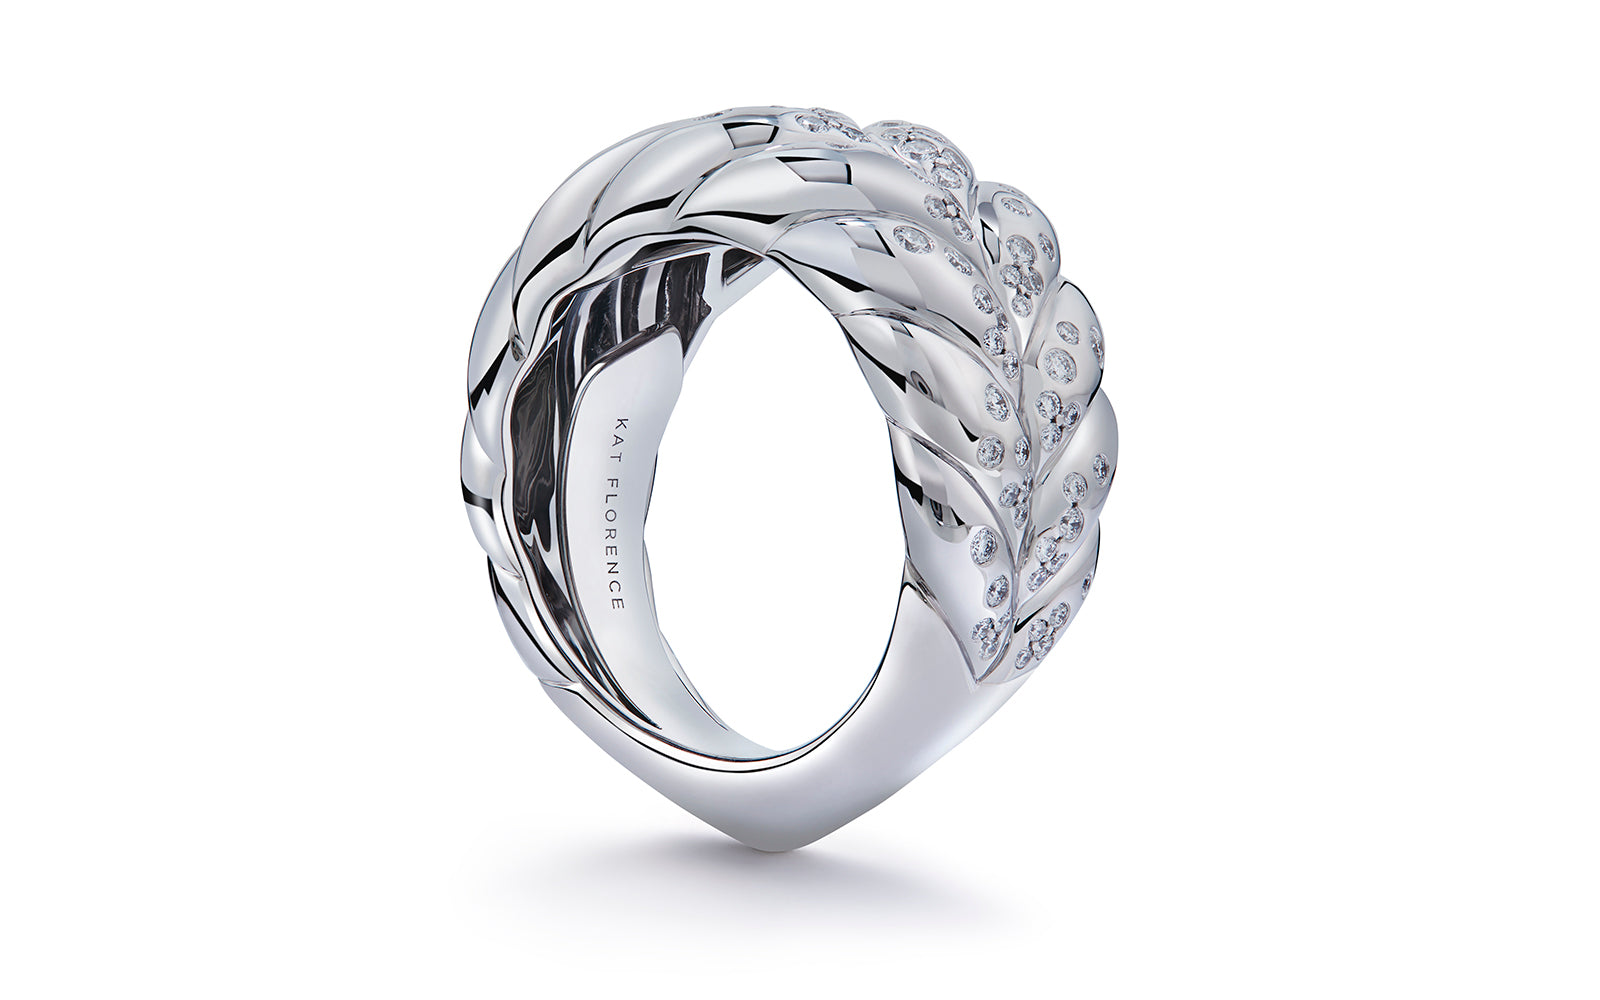 0.60ct D Flawless Diamonds Ring set in 18K White Gold